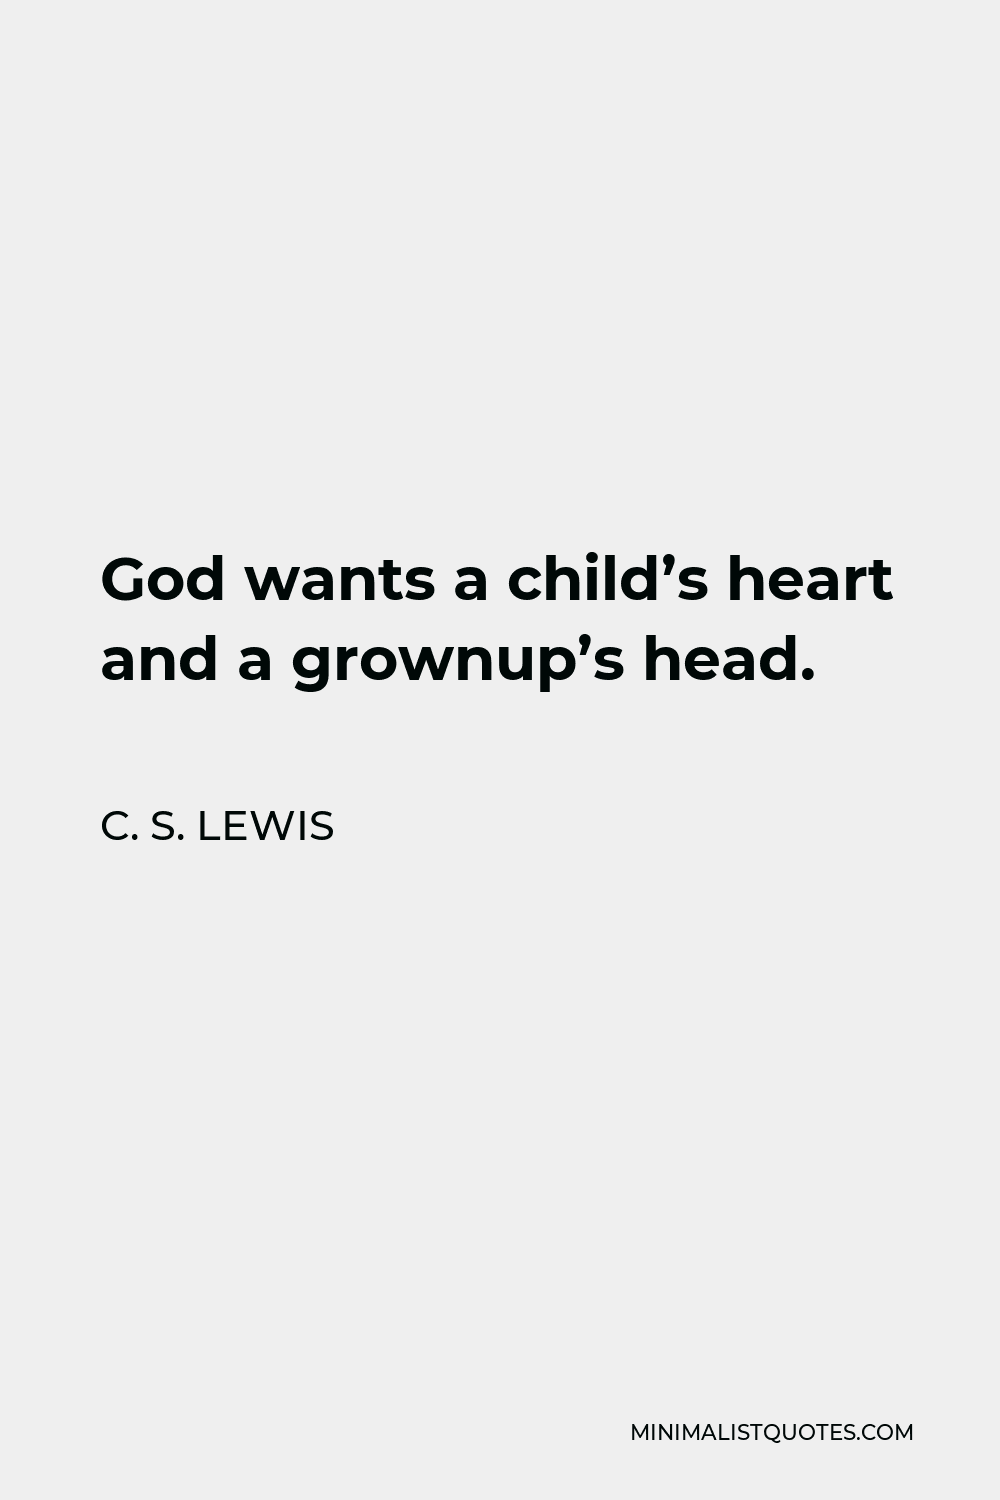 C. S. Lewis Quote - God wants a child’s heart and a grownup’s head.